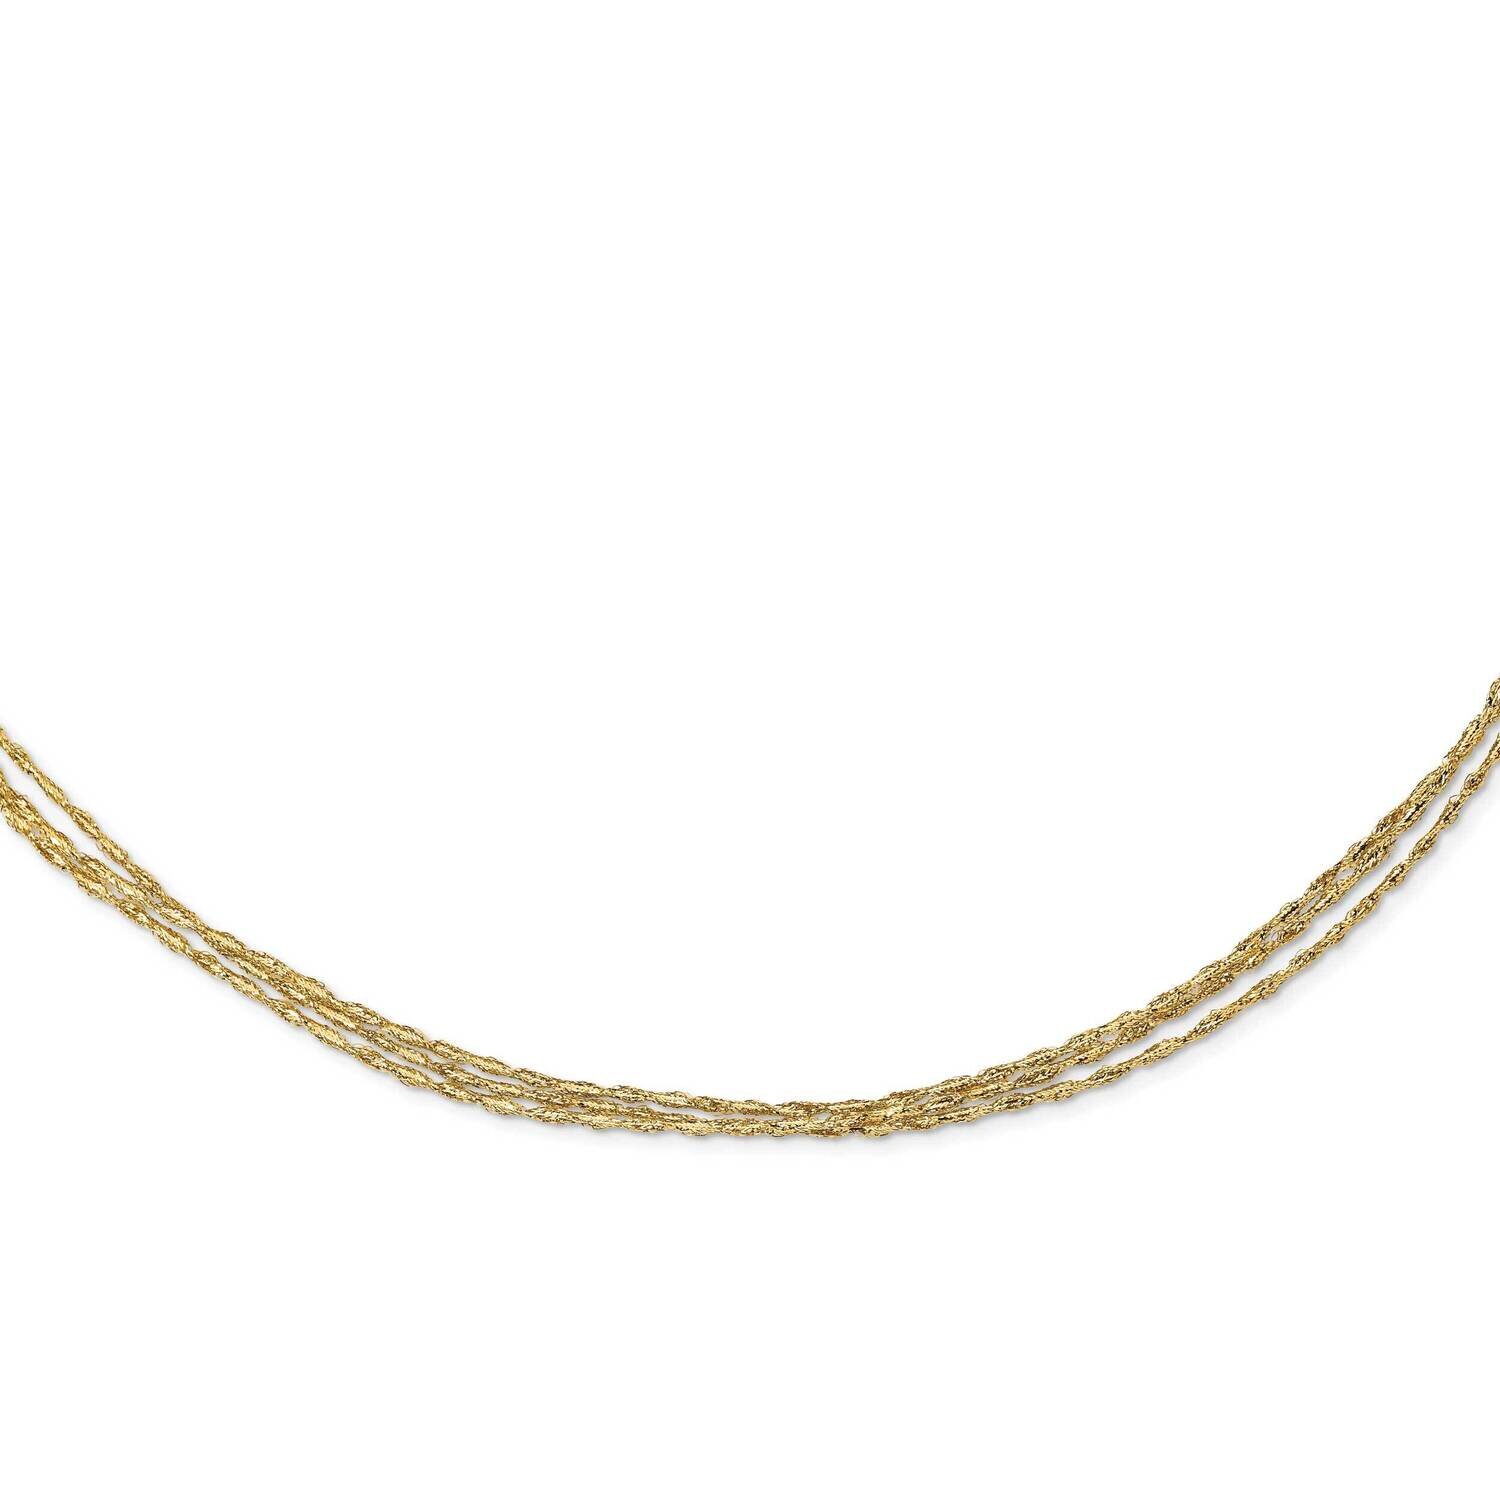 Three Strand Twisted Stretch Mesh Necklace 14k Gold SF2740-17.5